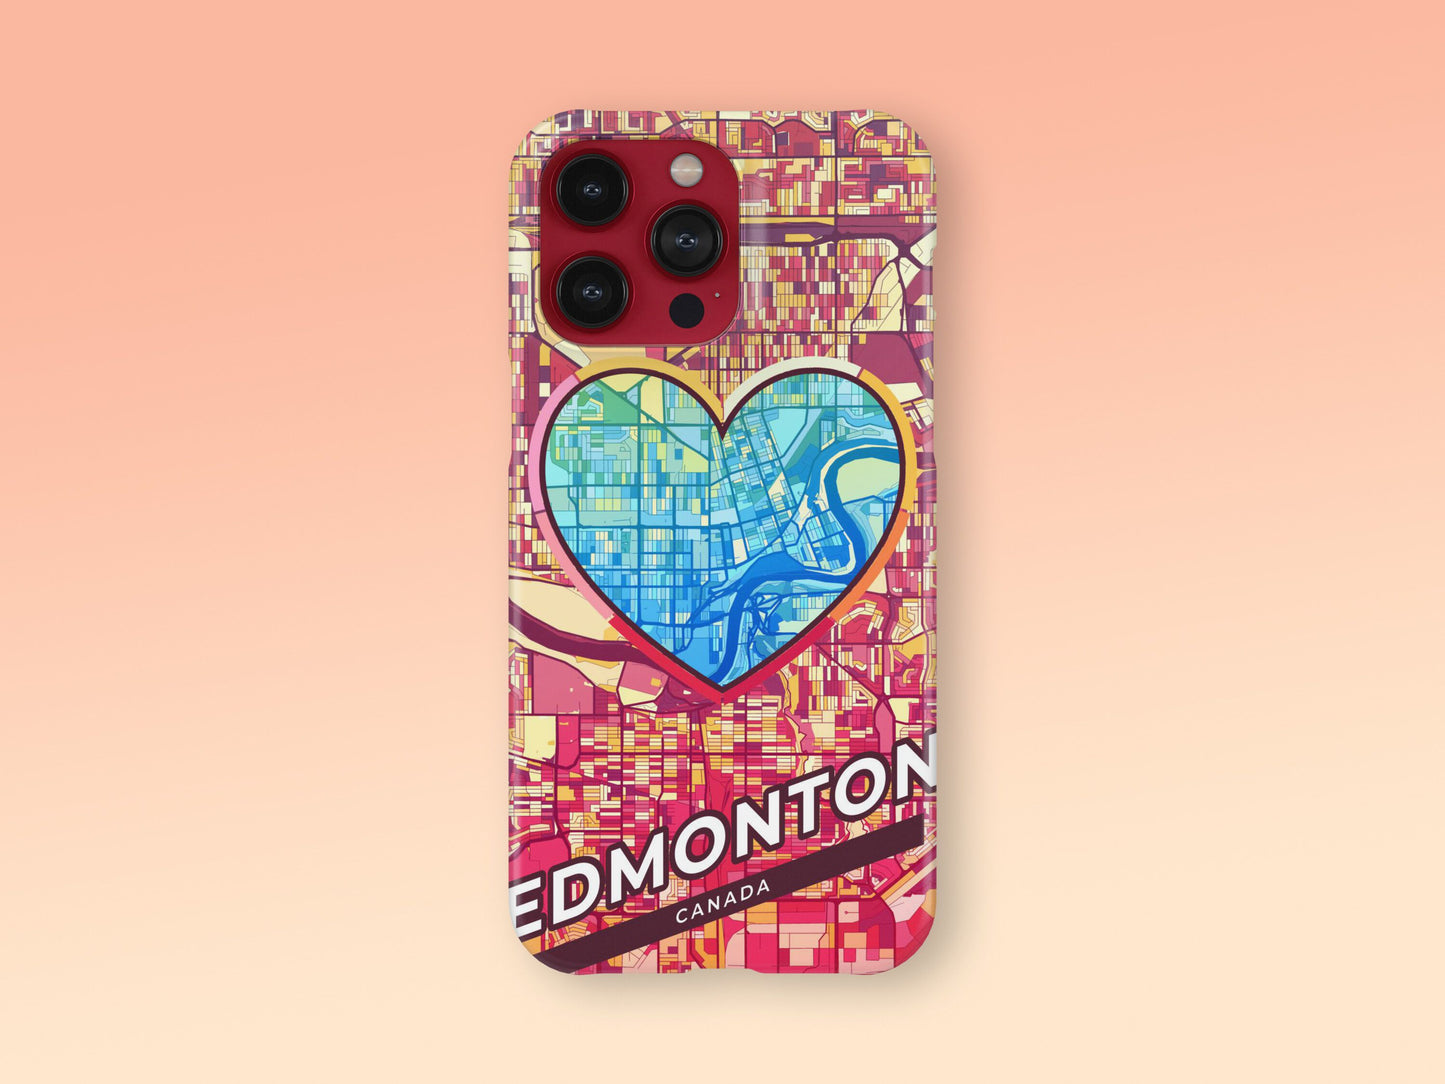 Edmonton Canada slim phone case with colorful icon. Birthday, wedding or housewarming gift. Couple match cases. 2